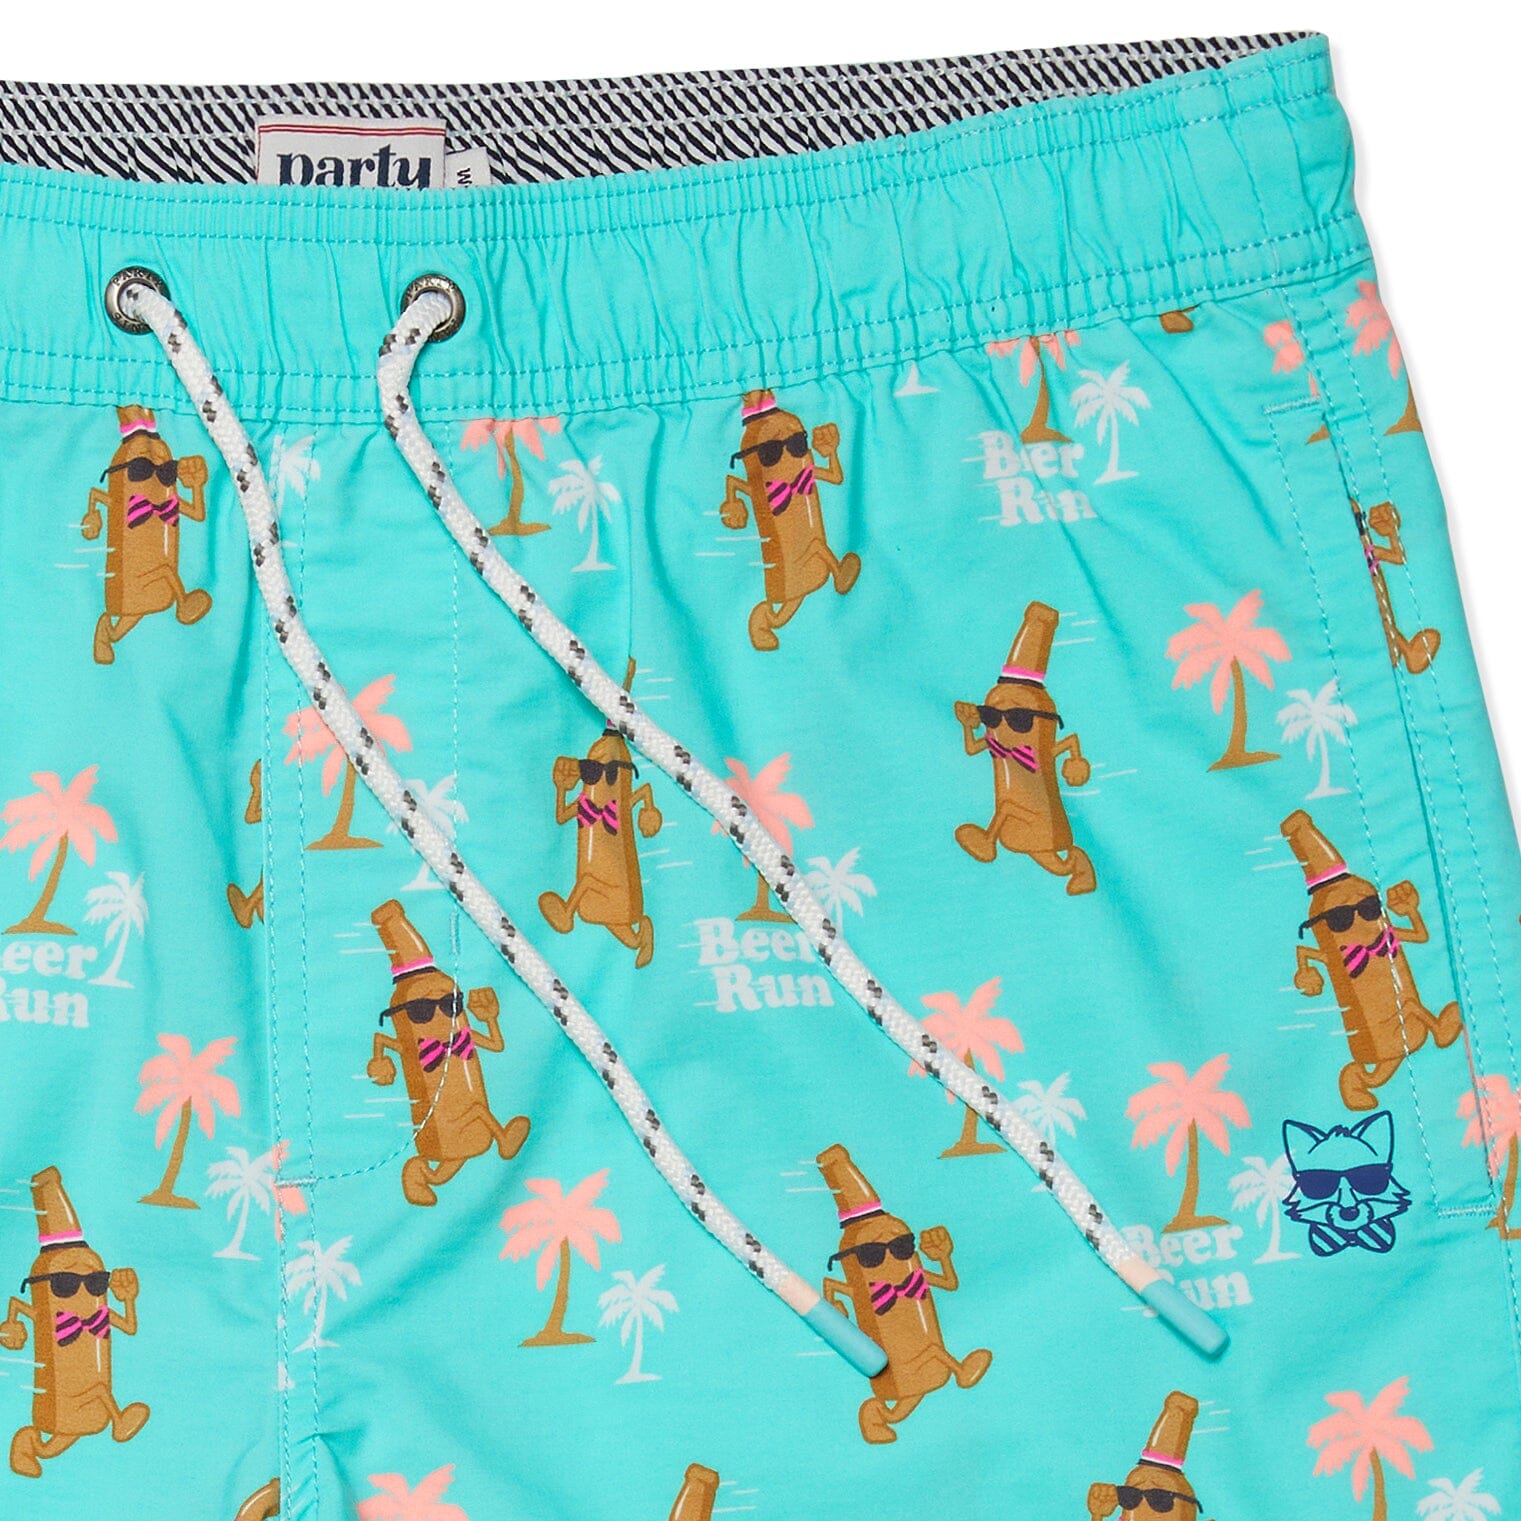 BEER RUN PARTY STARTER SHORT - MINT GREEN PRINTED SHORTS PARTY PANTS 